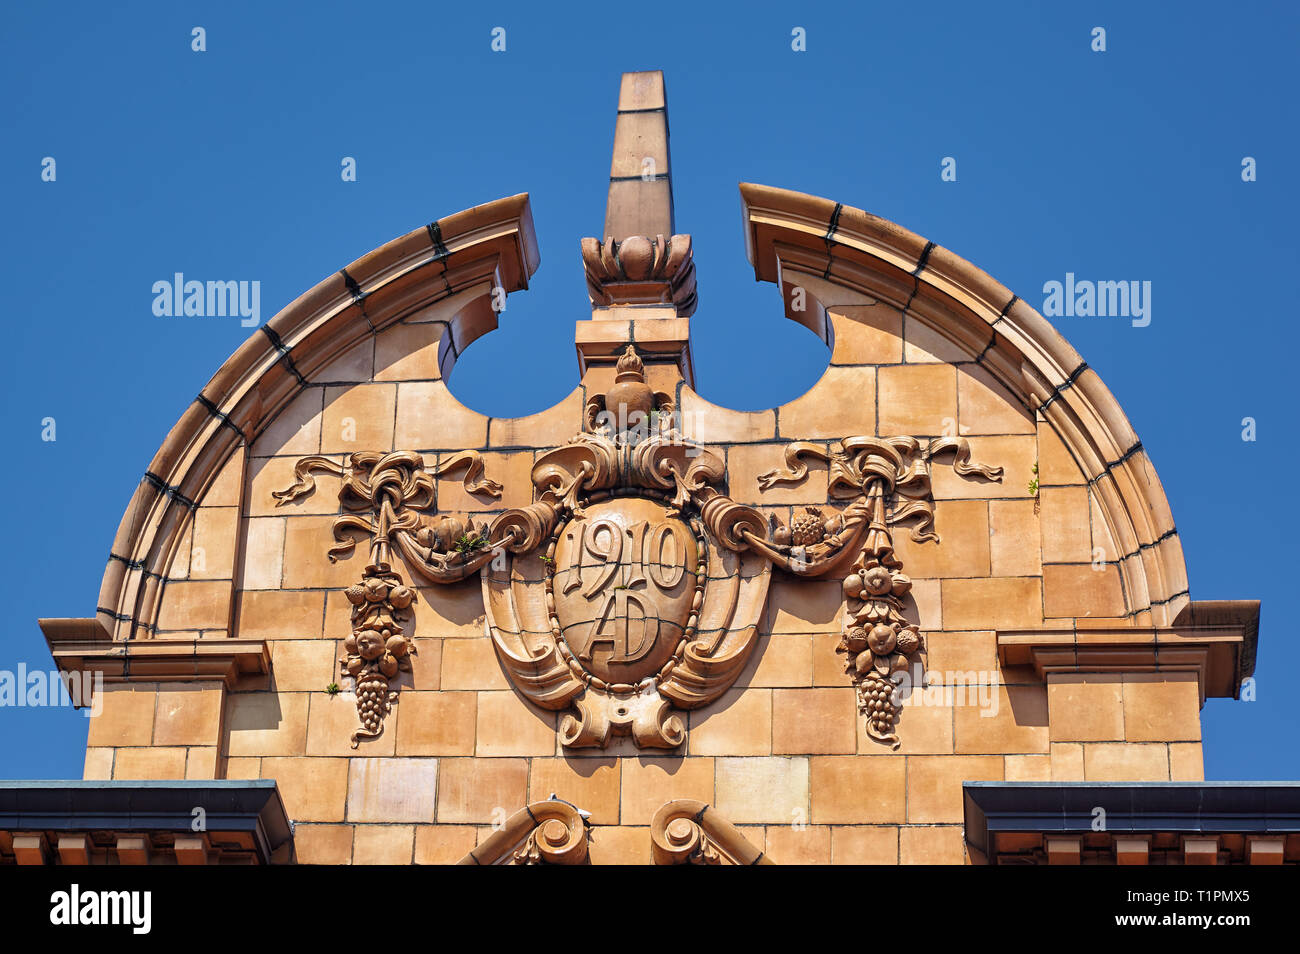 The date-stones thread (1910) on the top of Cavendish Buildings, depicts one of the phases of work done on the building. Sheffield. England Stock Photo